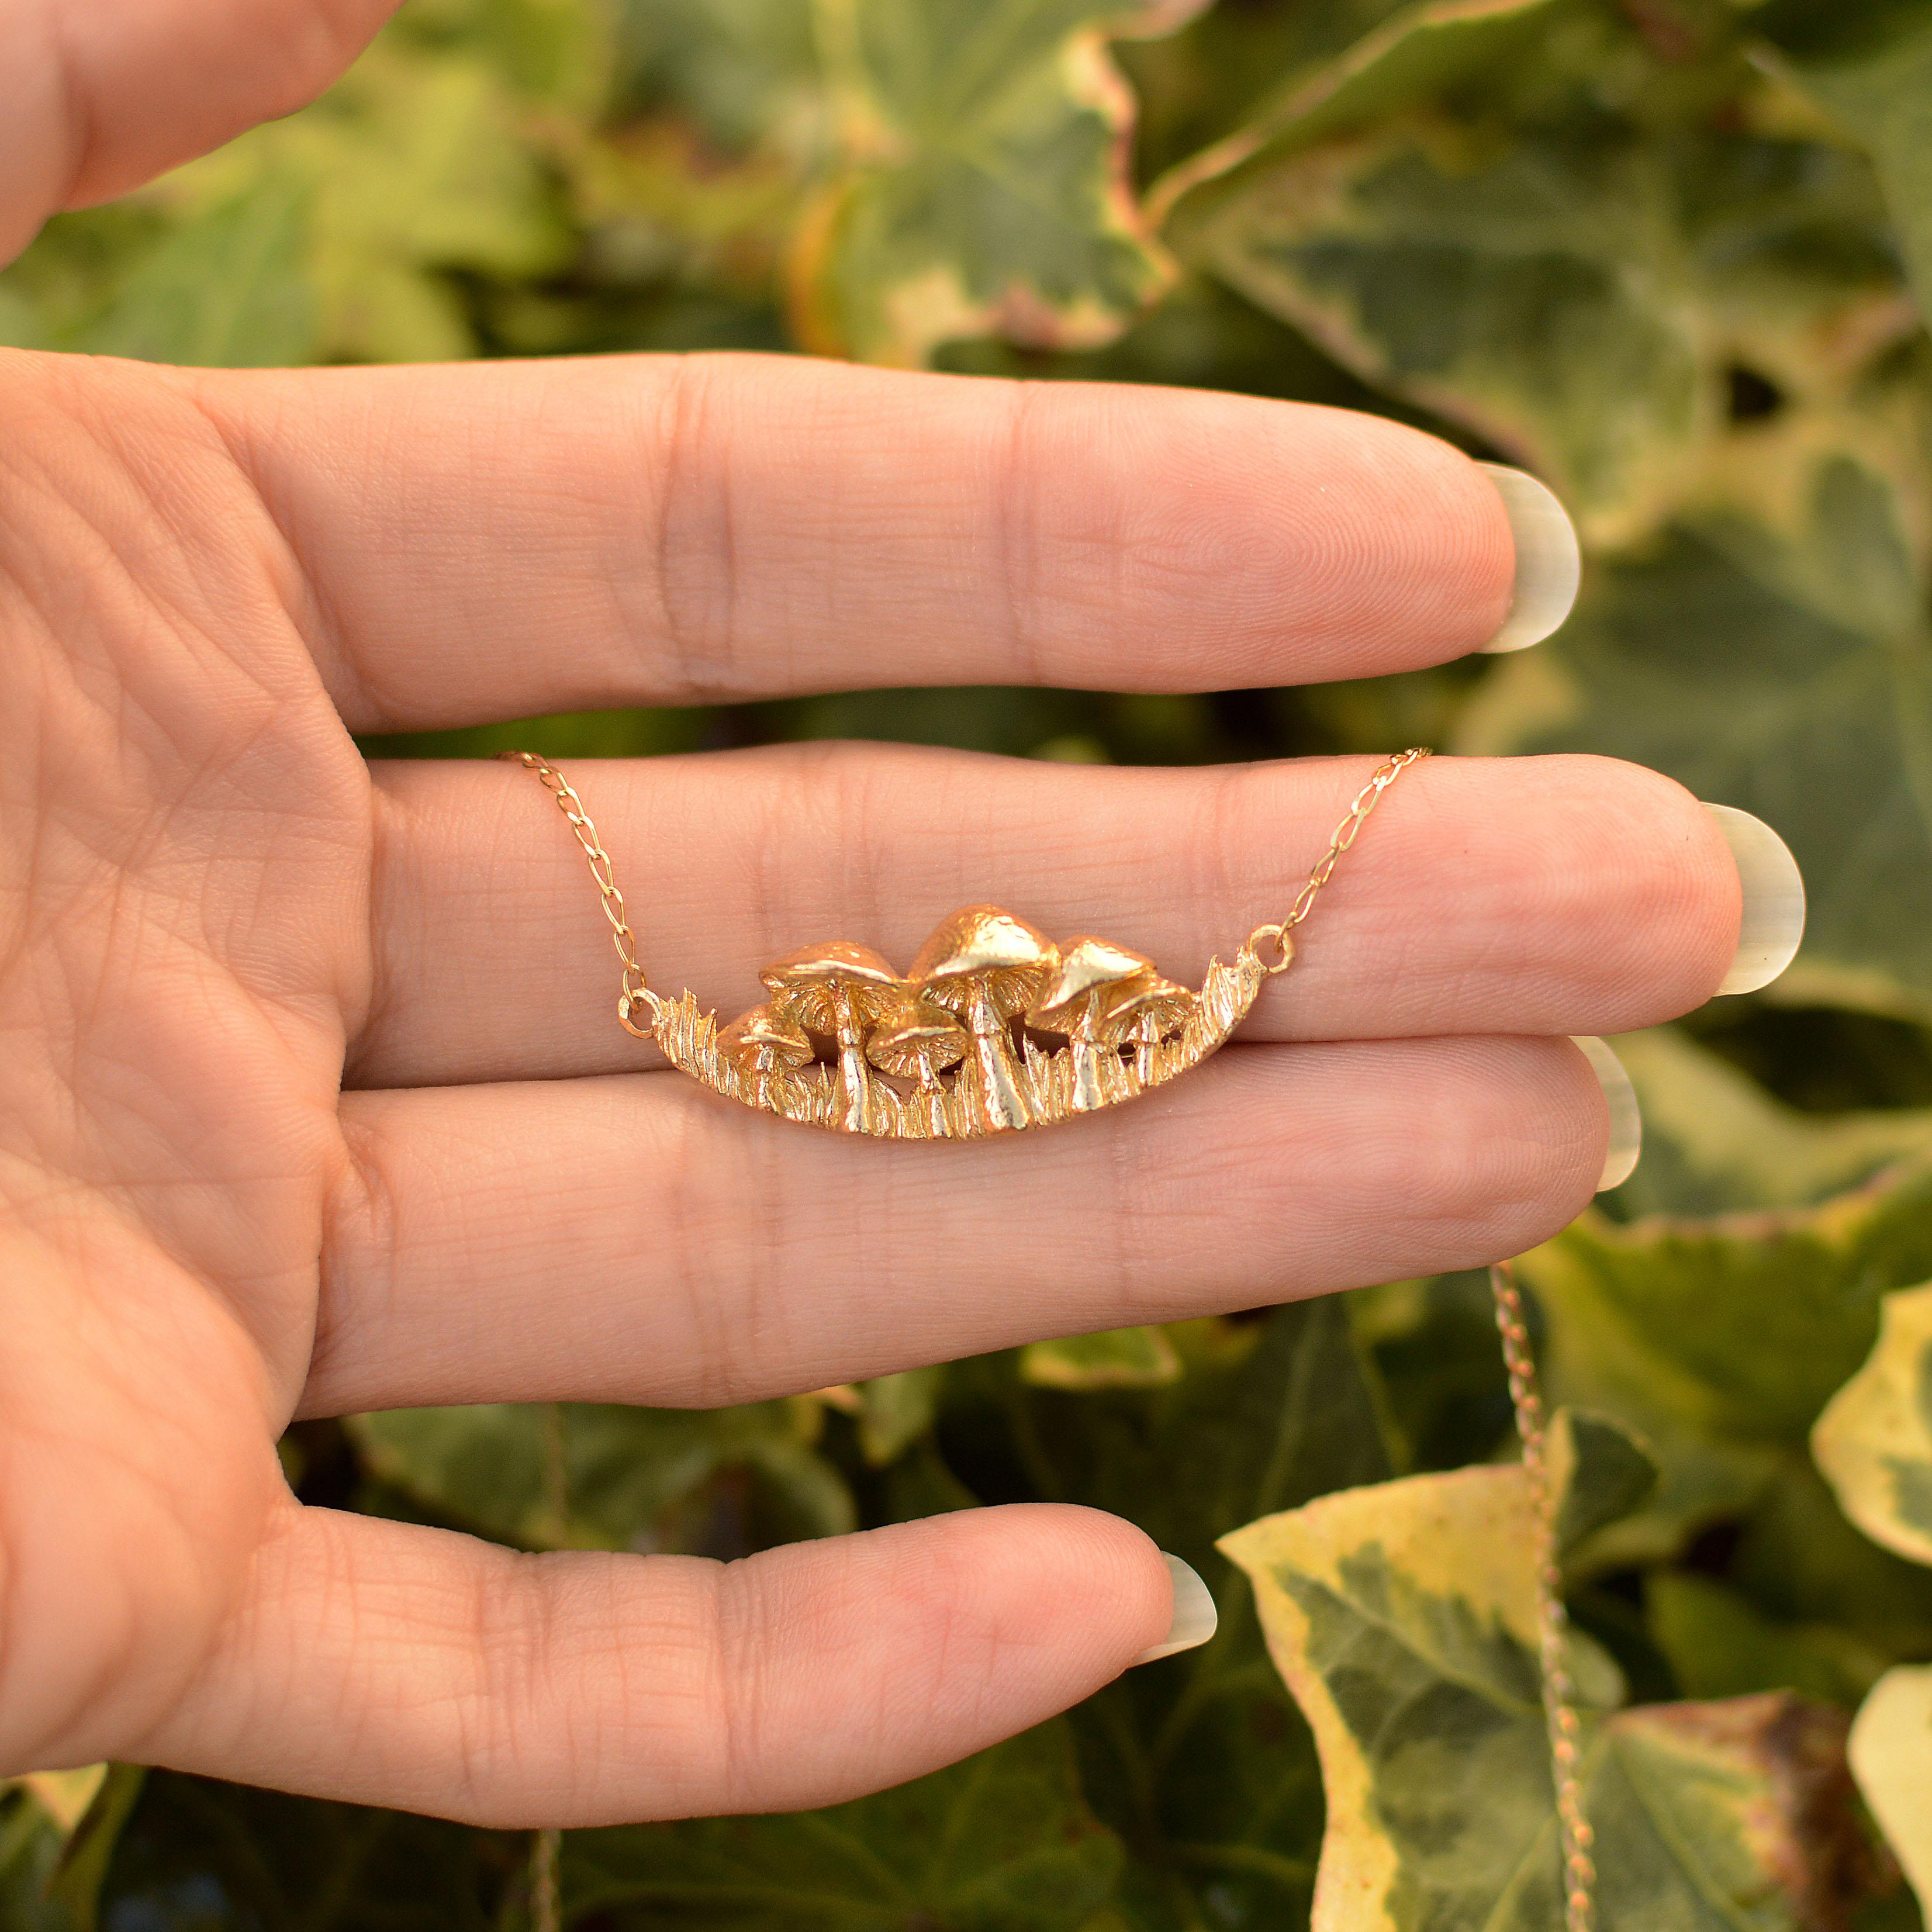 This magical mushroom patch necklace is cast in solid 18 Carat gold and finished by hand, and is created from Lucy's original hand-sculpted design.  The necklace is approximately 17 inches in length. 

This mushroom necklace is made in London,